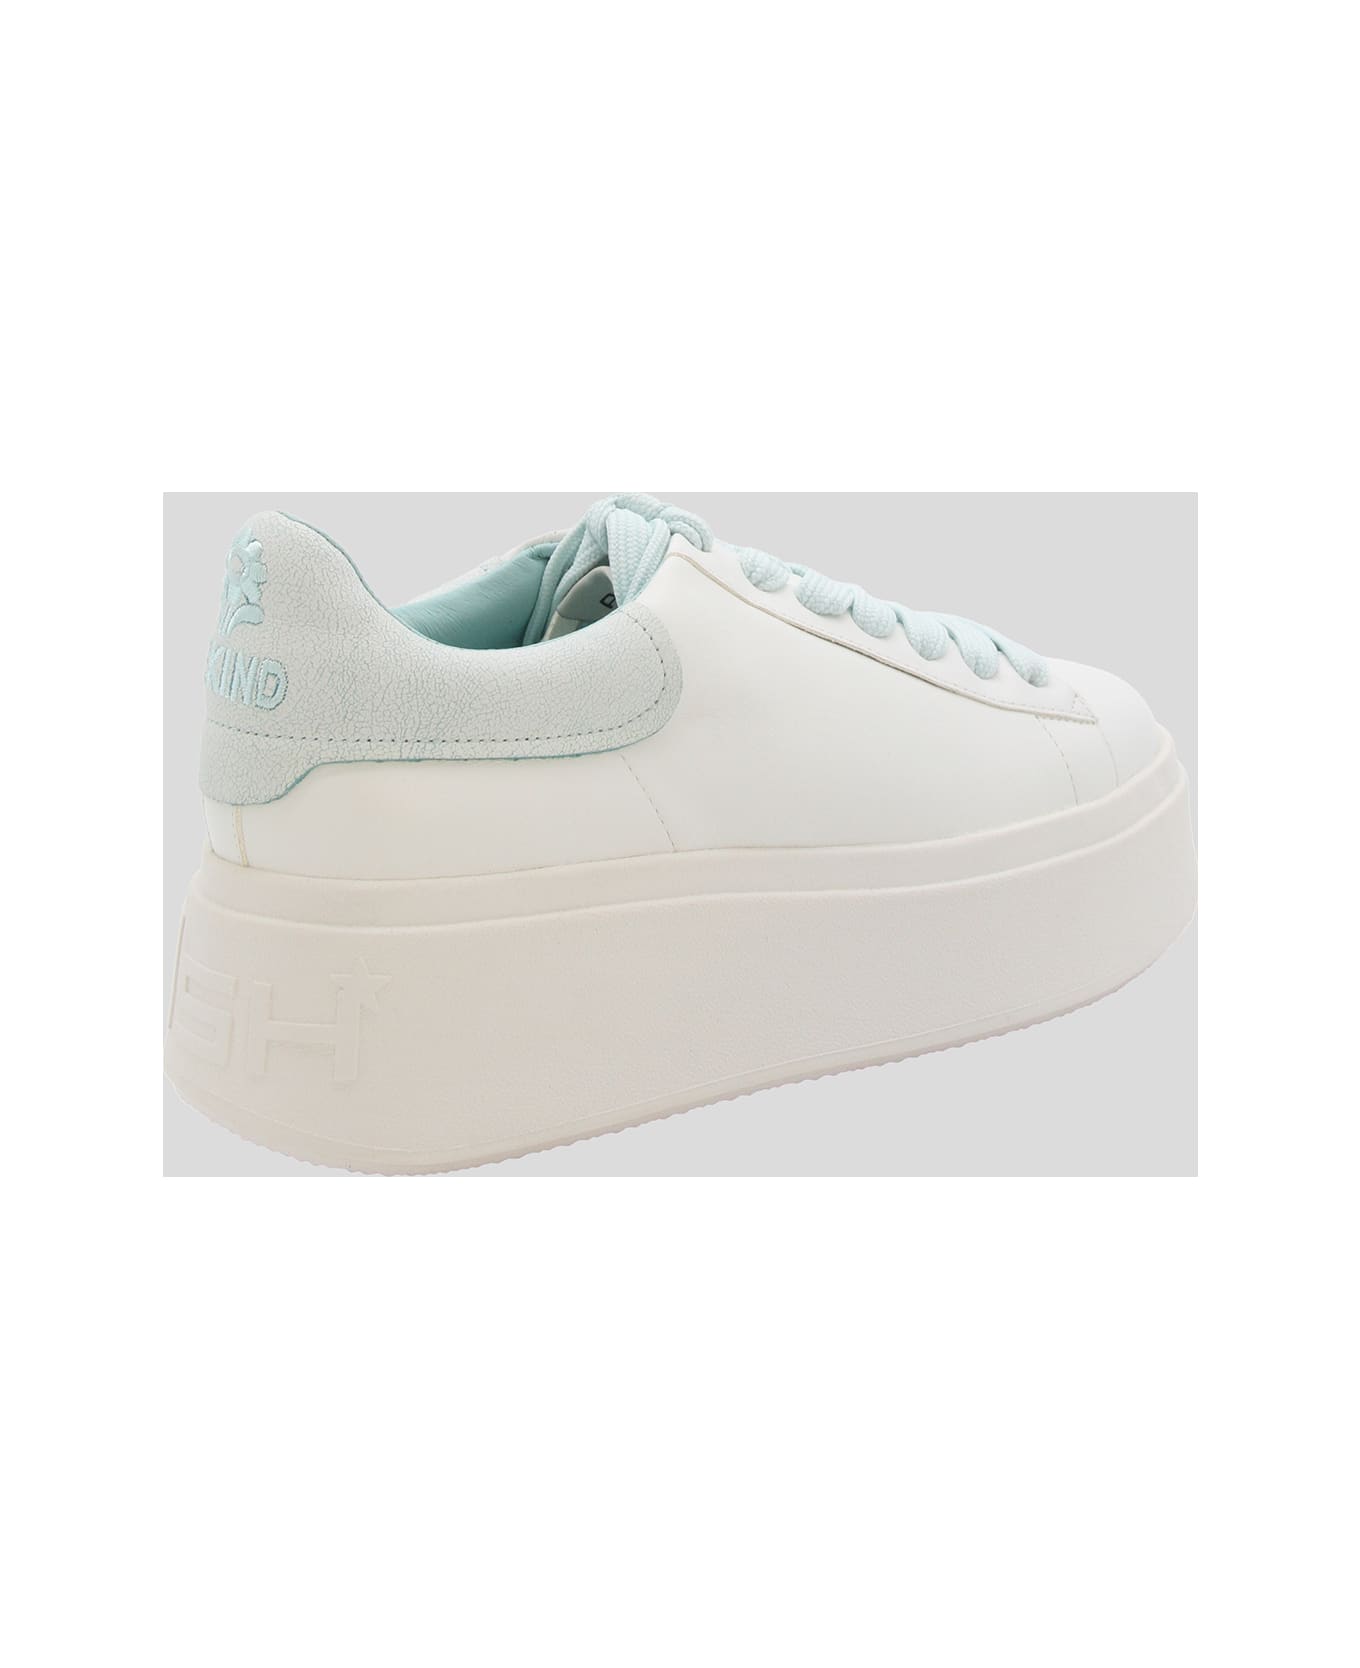 Ash White Leather Sneakers - WHITE/WATER